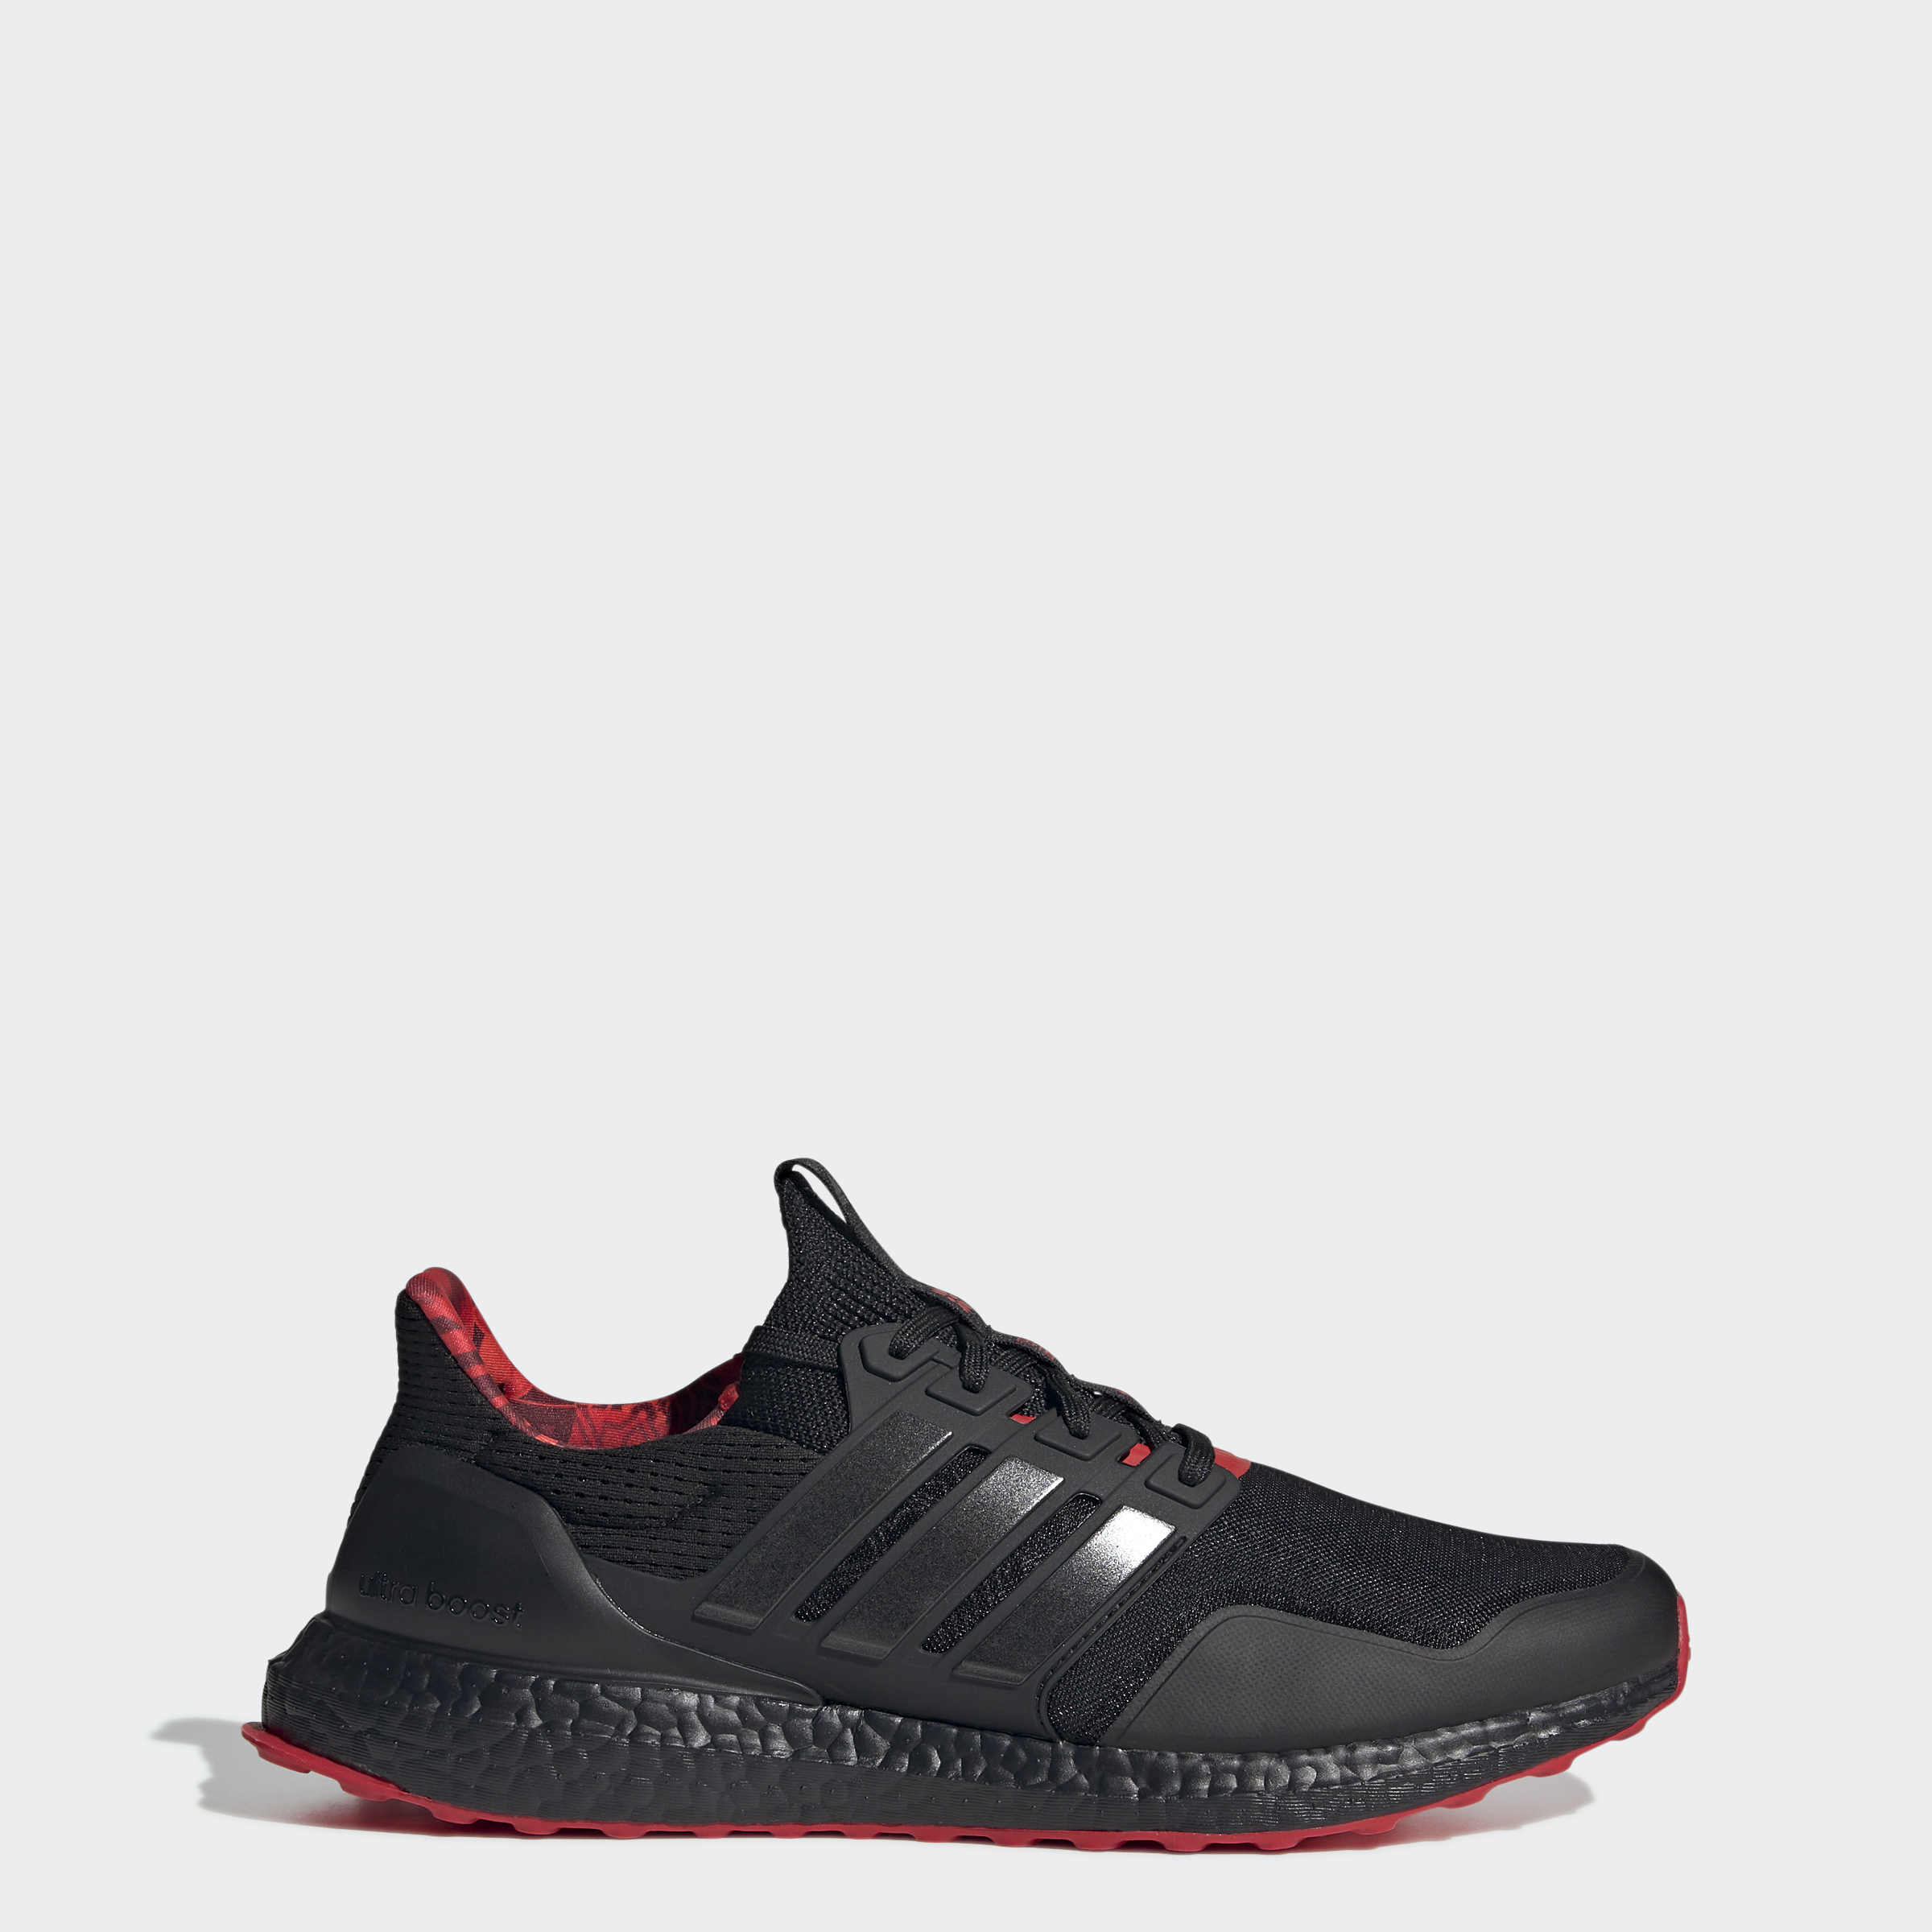 ultraboost dna lunar new year shoes